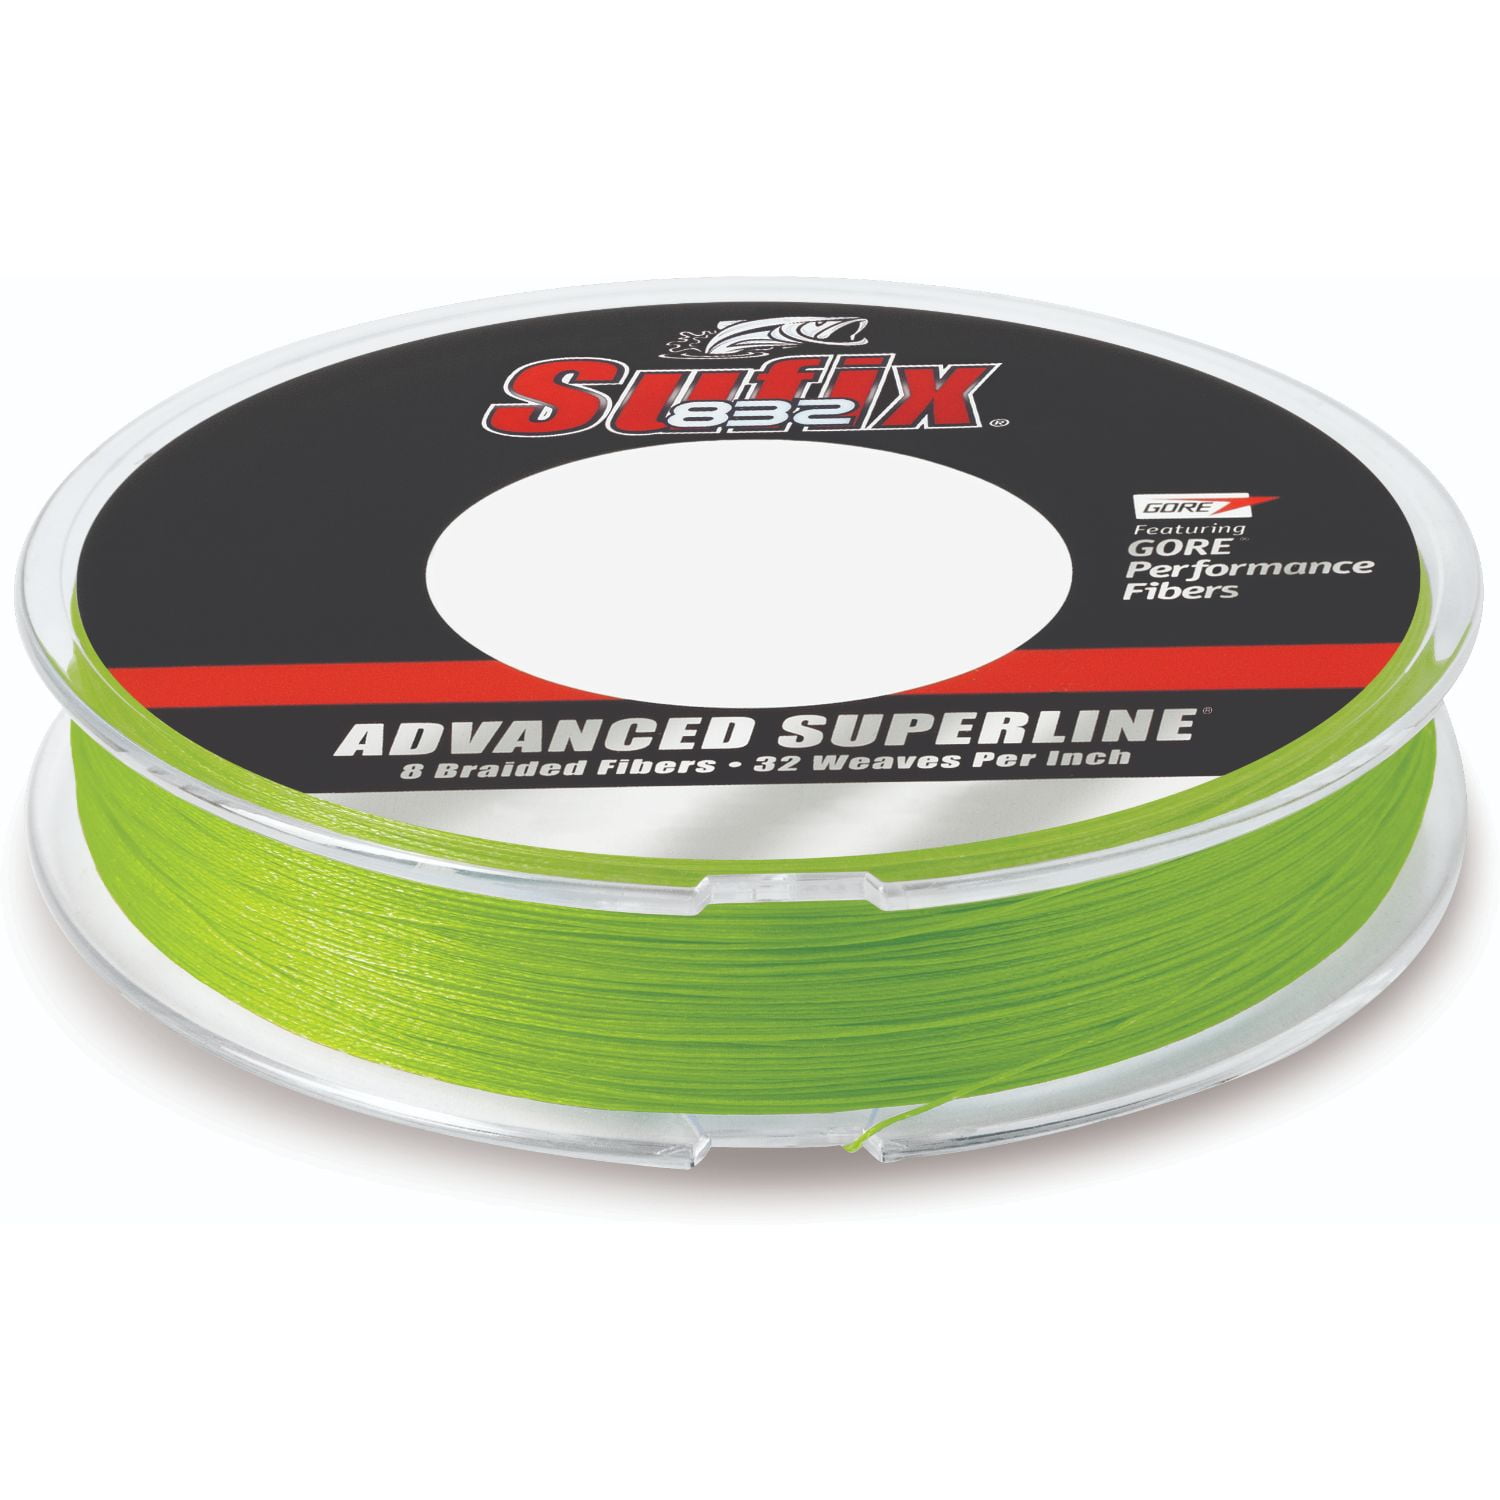 Details about   Suffix Fishing Line PERFORMANCE BRAID 100yd 50lb Neon Fire FREE UK POSTAGE SALE 